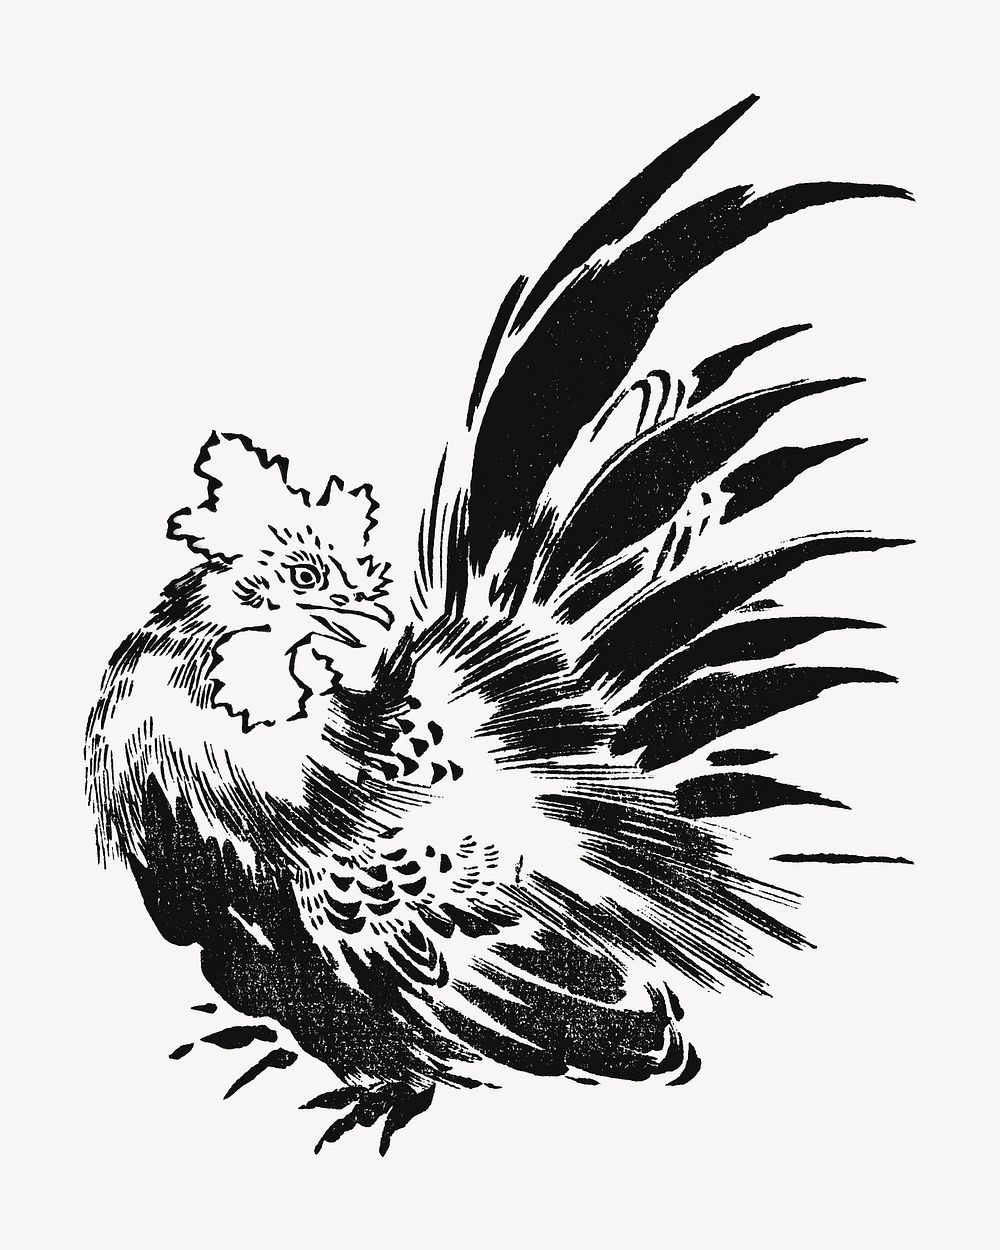 Japanese chicken, ink animal illustration by Toyeki psd. Remixed by rawpixel.